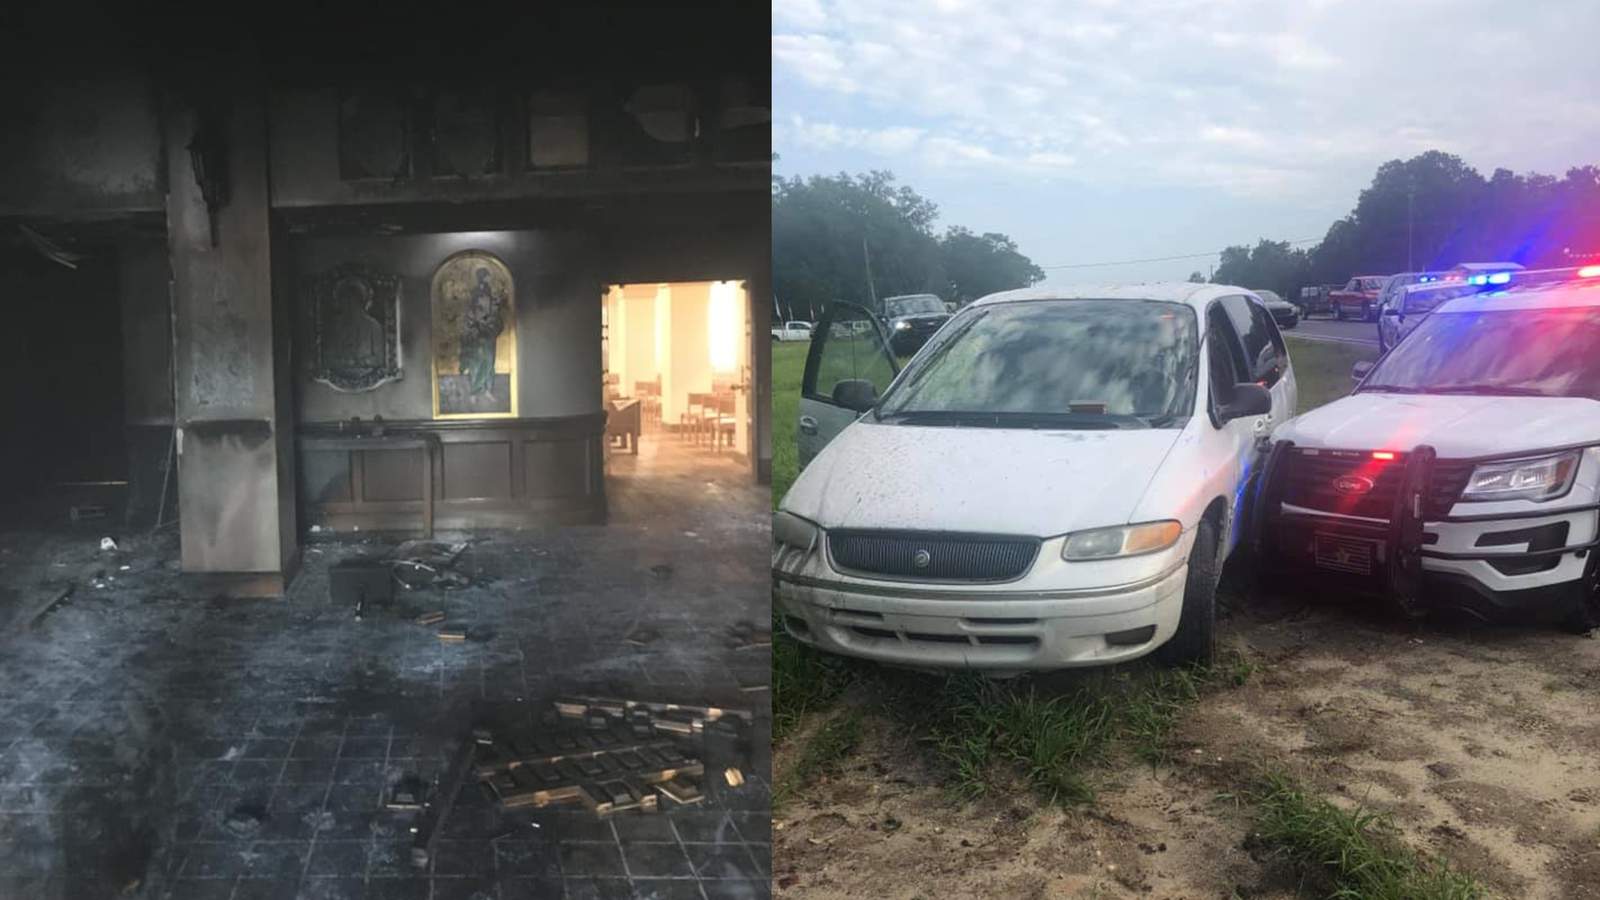 Marion County man drives into church, lights fire with people inside, deputies say